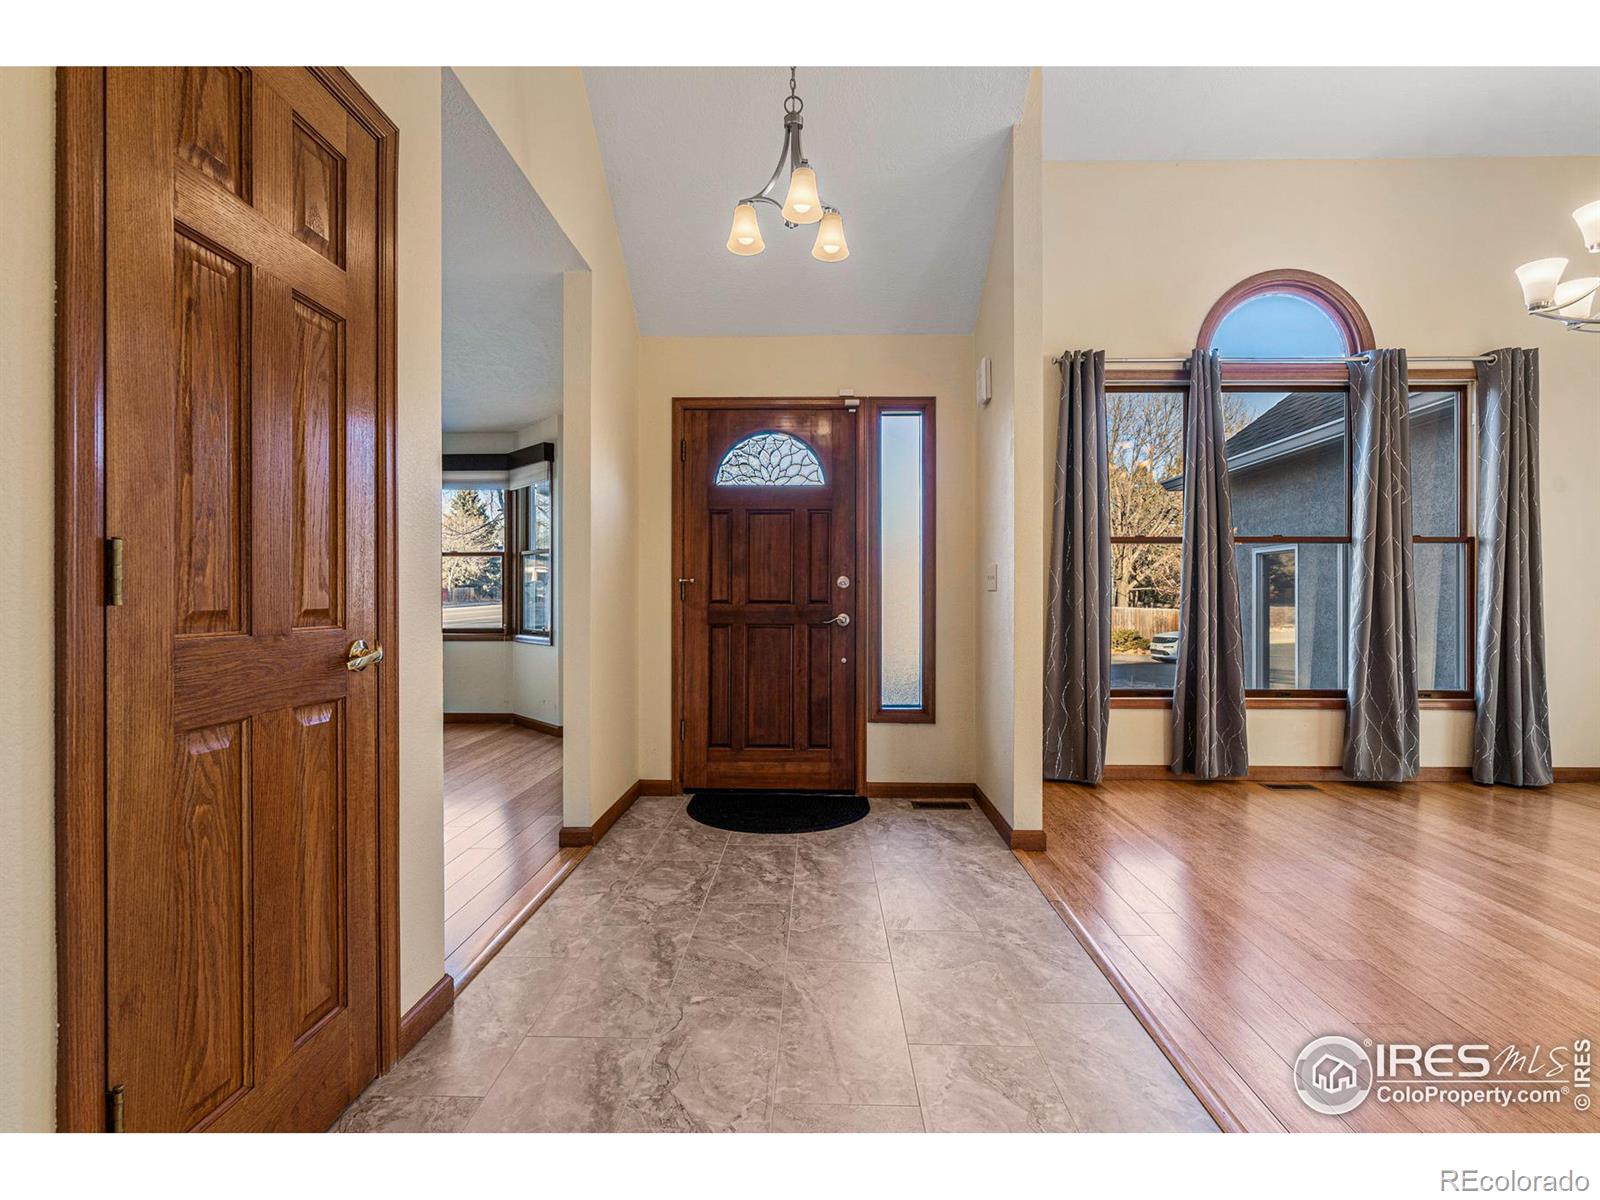 CMA Image for 4267 w 14th st rd,Greeley, Colorado